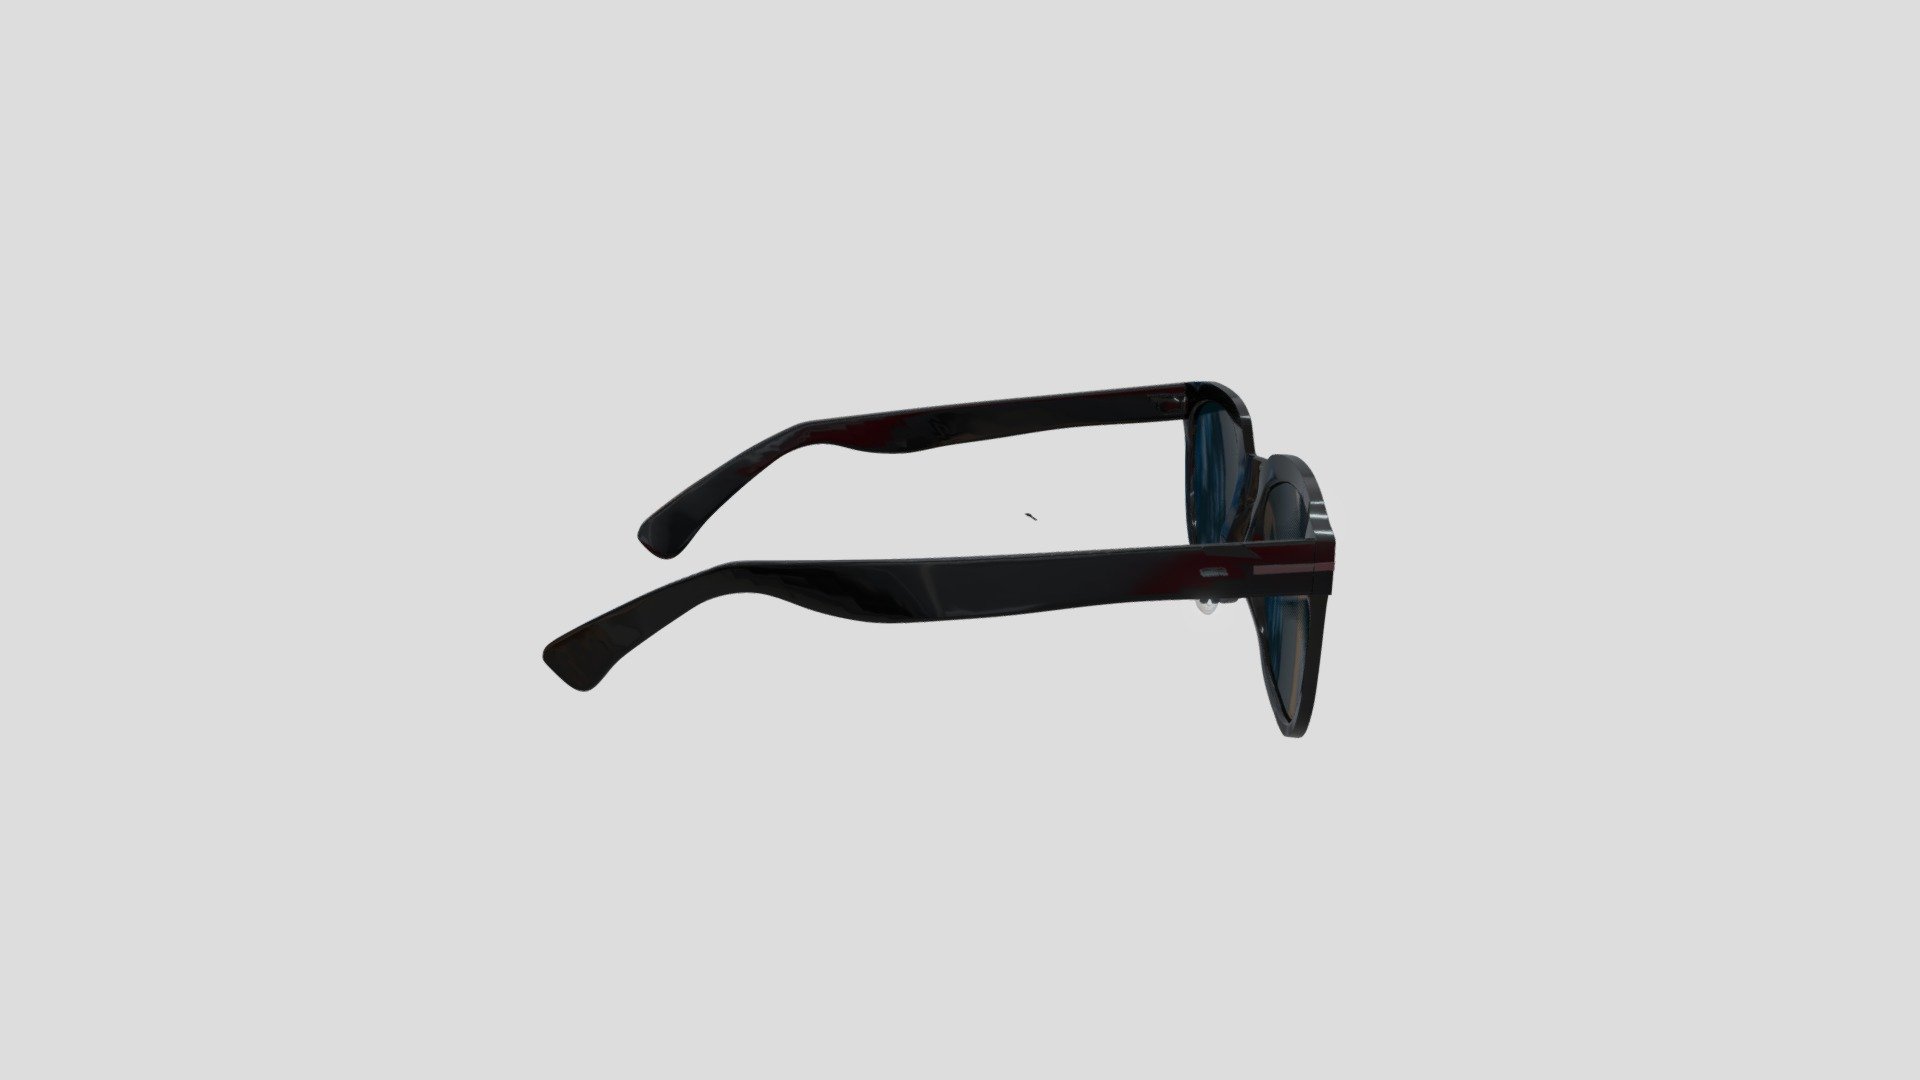 This is a 3D model of Lunettes Eyewear's top selling Sunglasses &ldquo;Cole Black